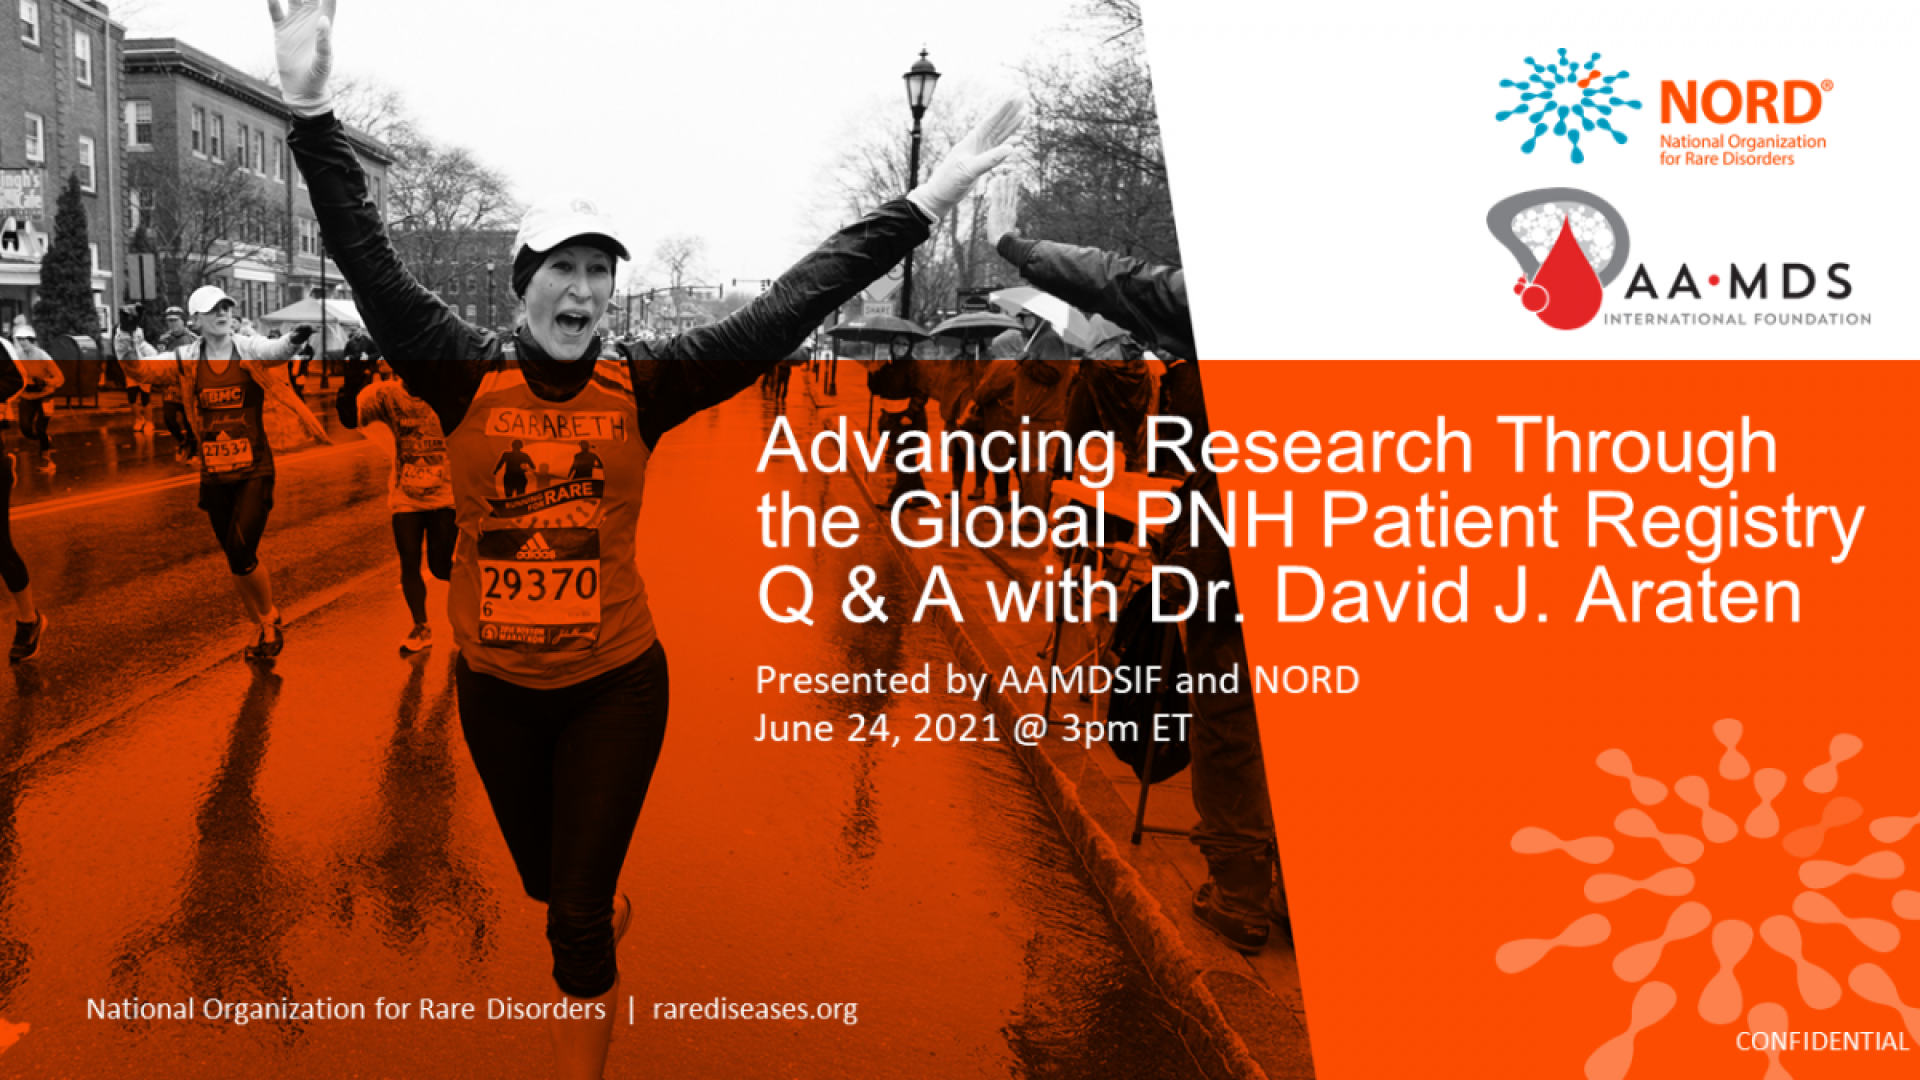 advancing research through the P-N-H global patient registry